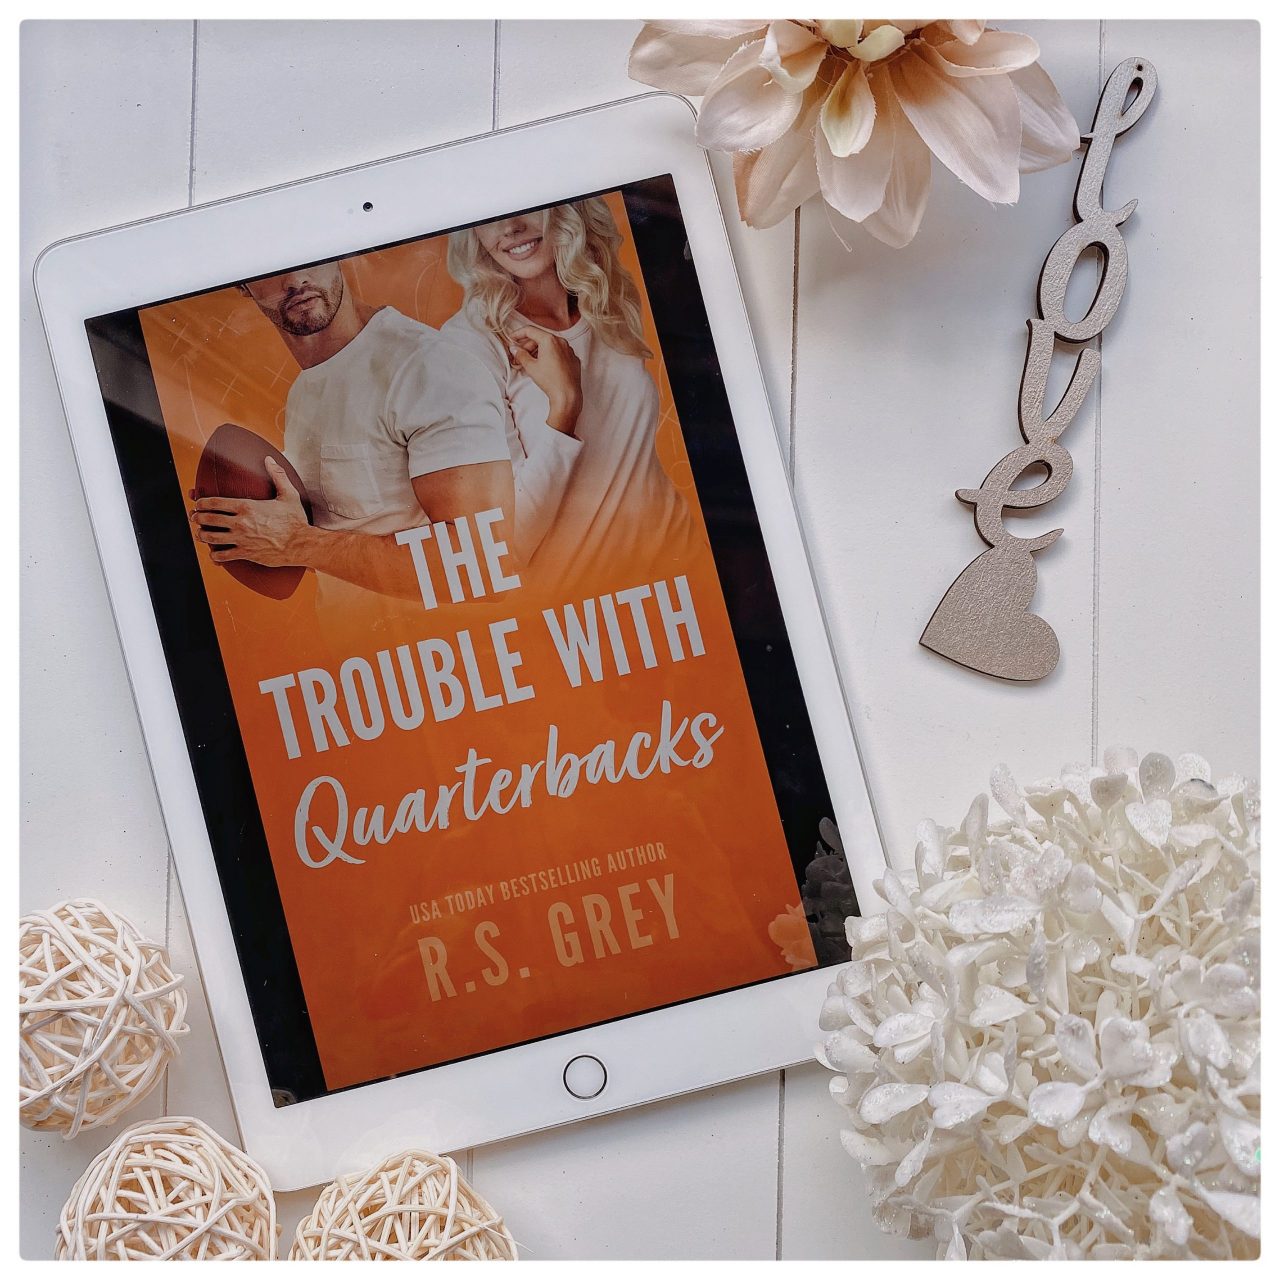 Book review: The Trouble with Quarterbacks by R.S. Grey